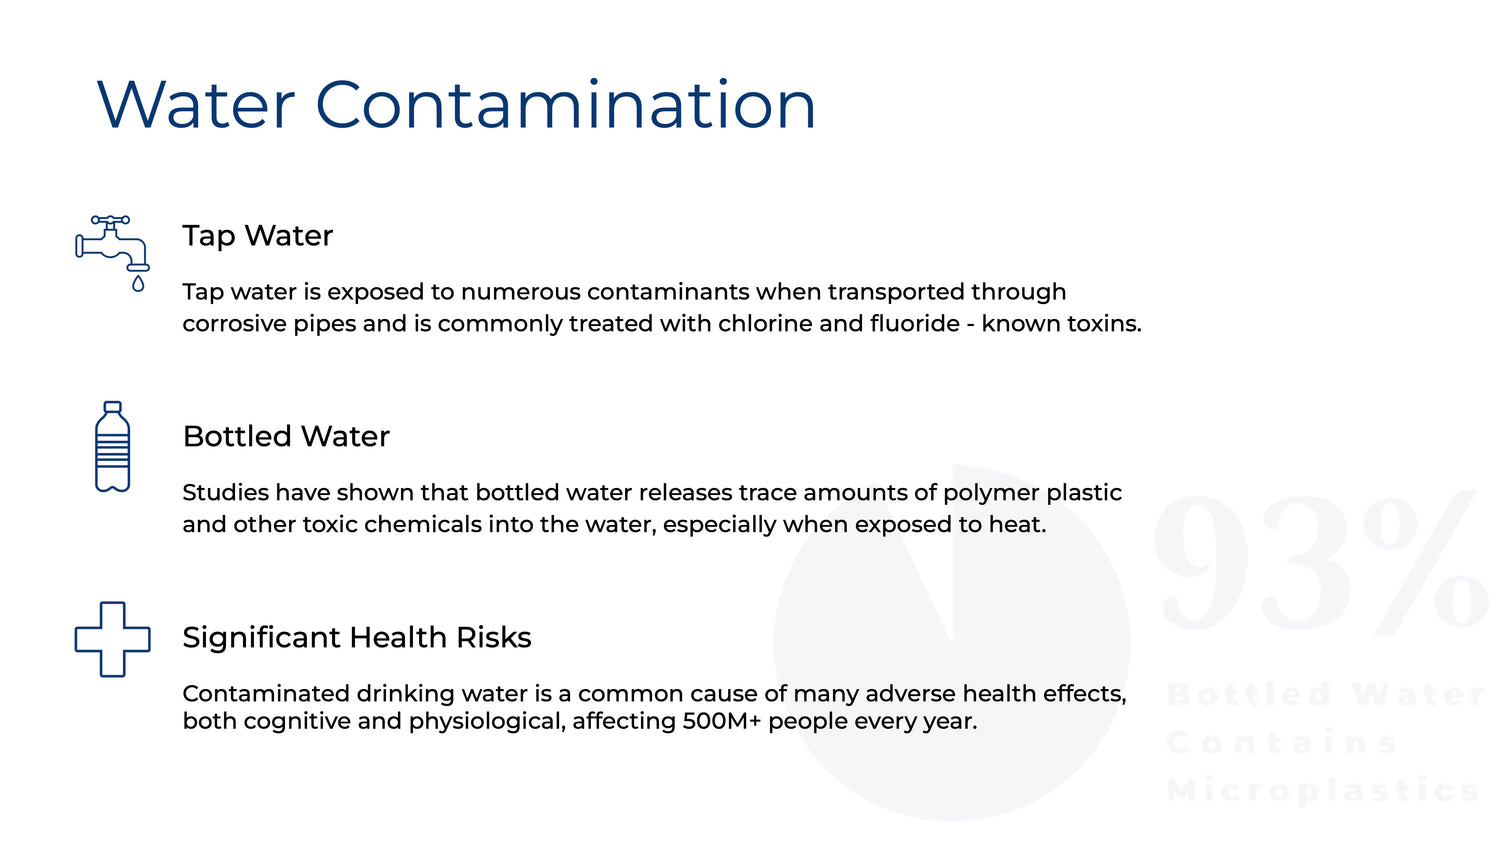 Water Contamination: tap water contamination, bottled water contamination, associated health risks.